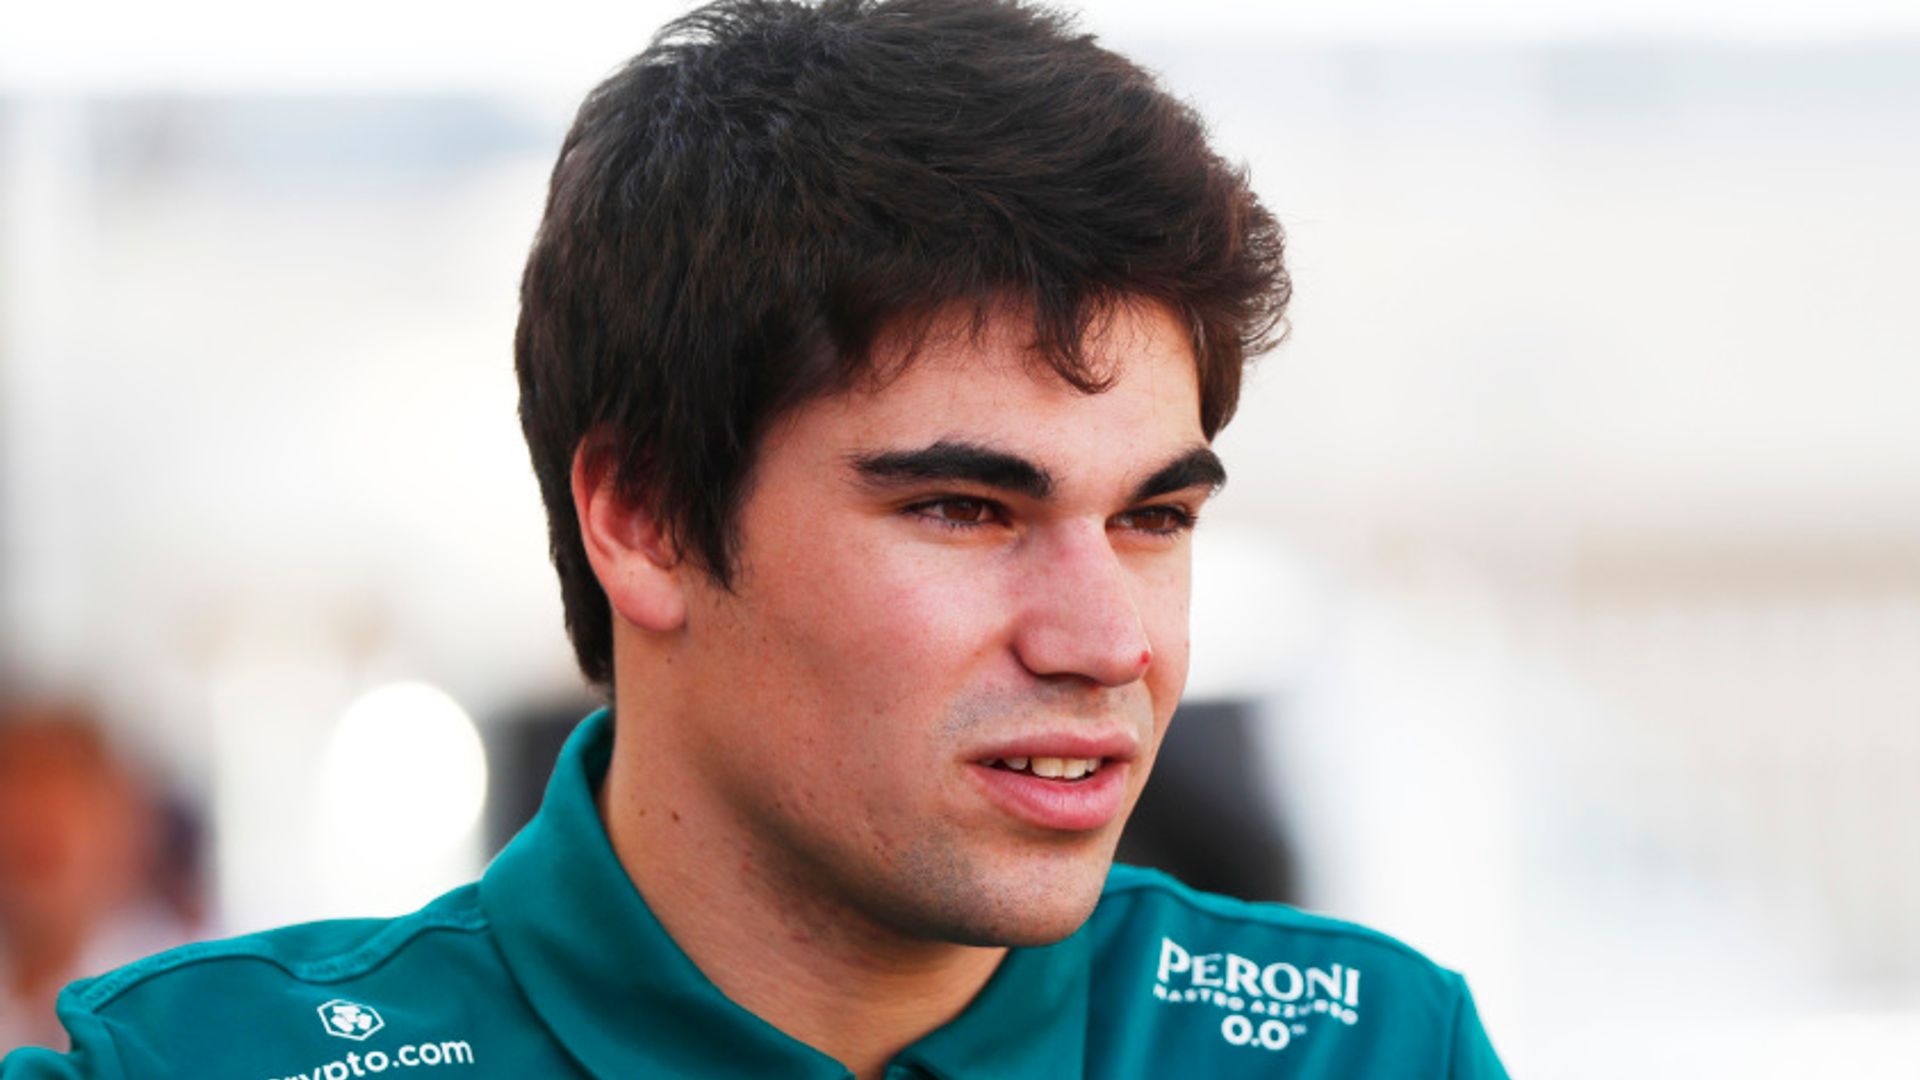 Stroll to miss pre-season testing after 'minor' cycling accident